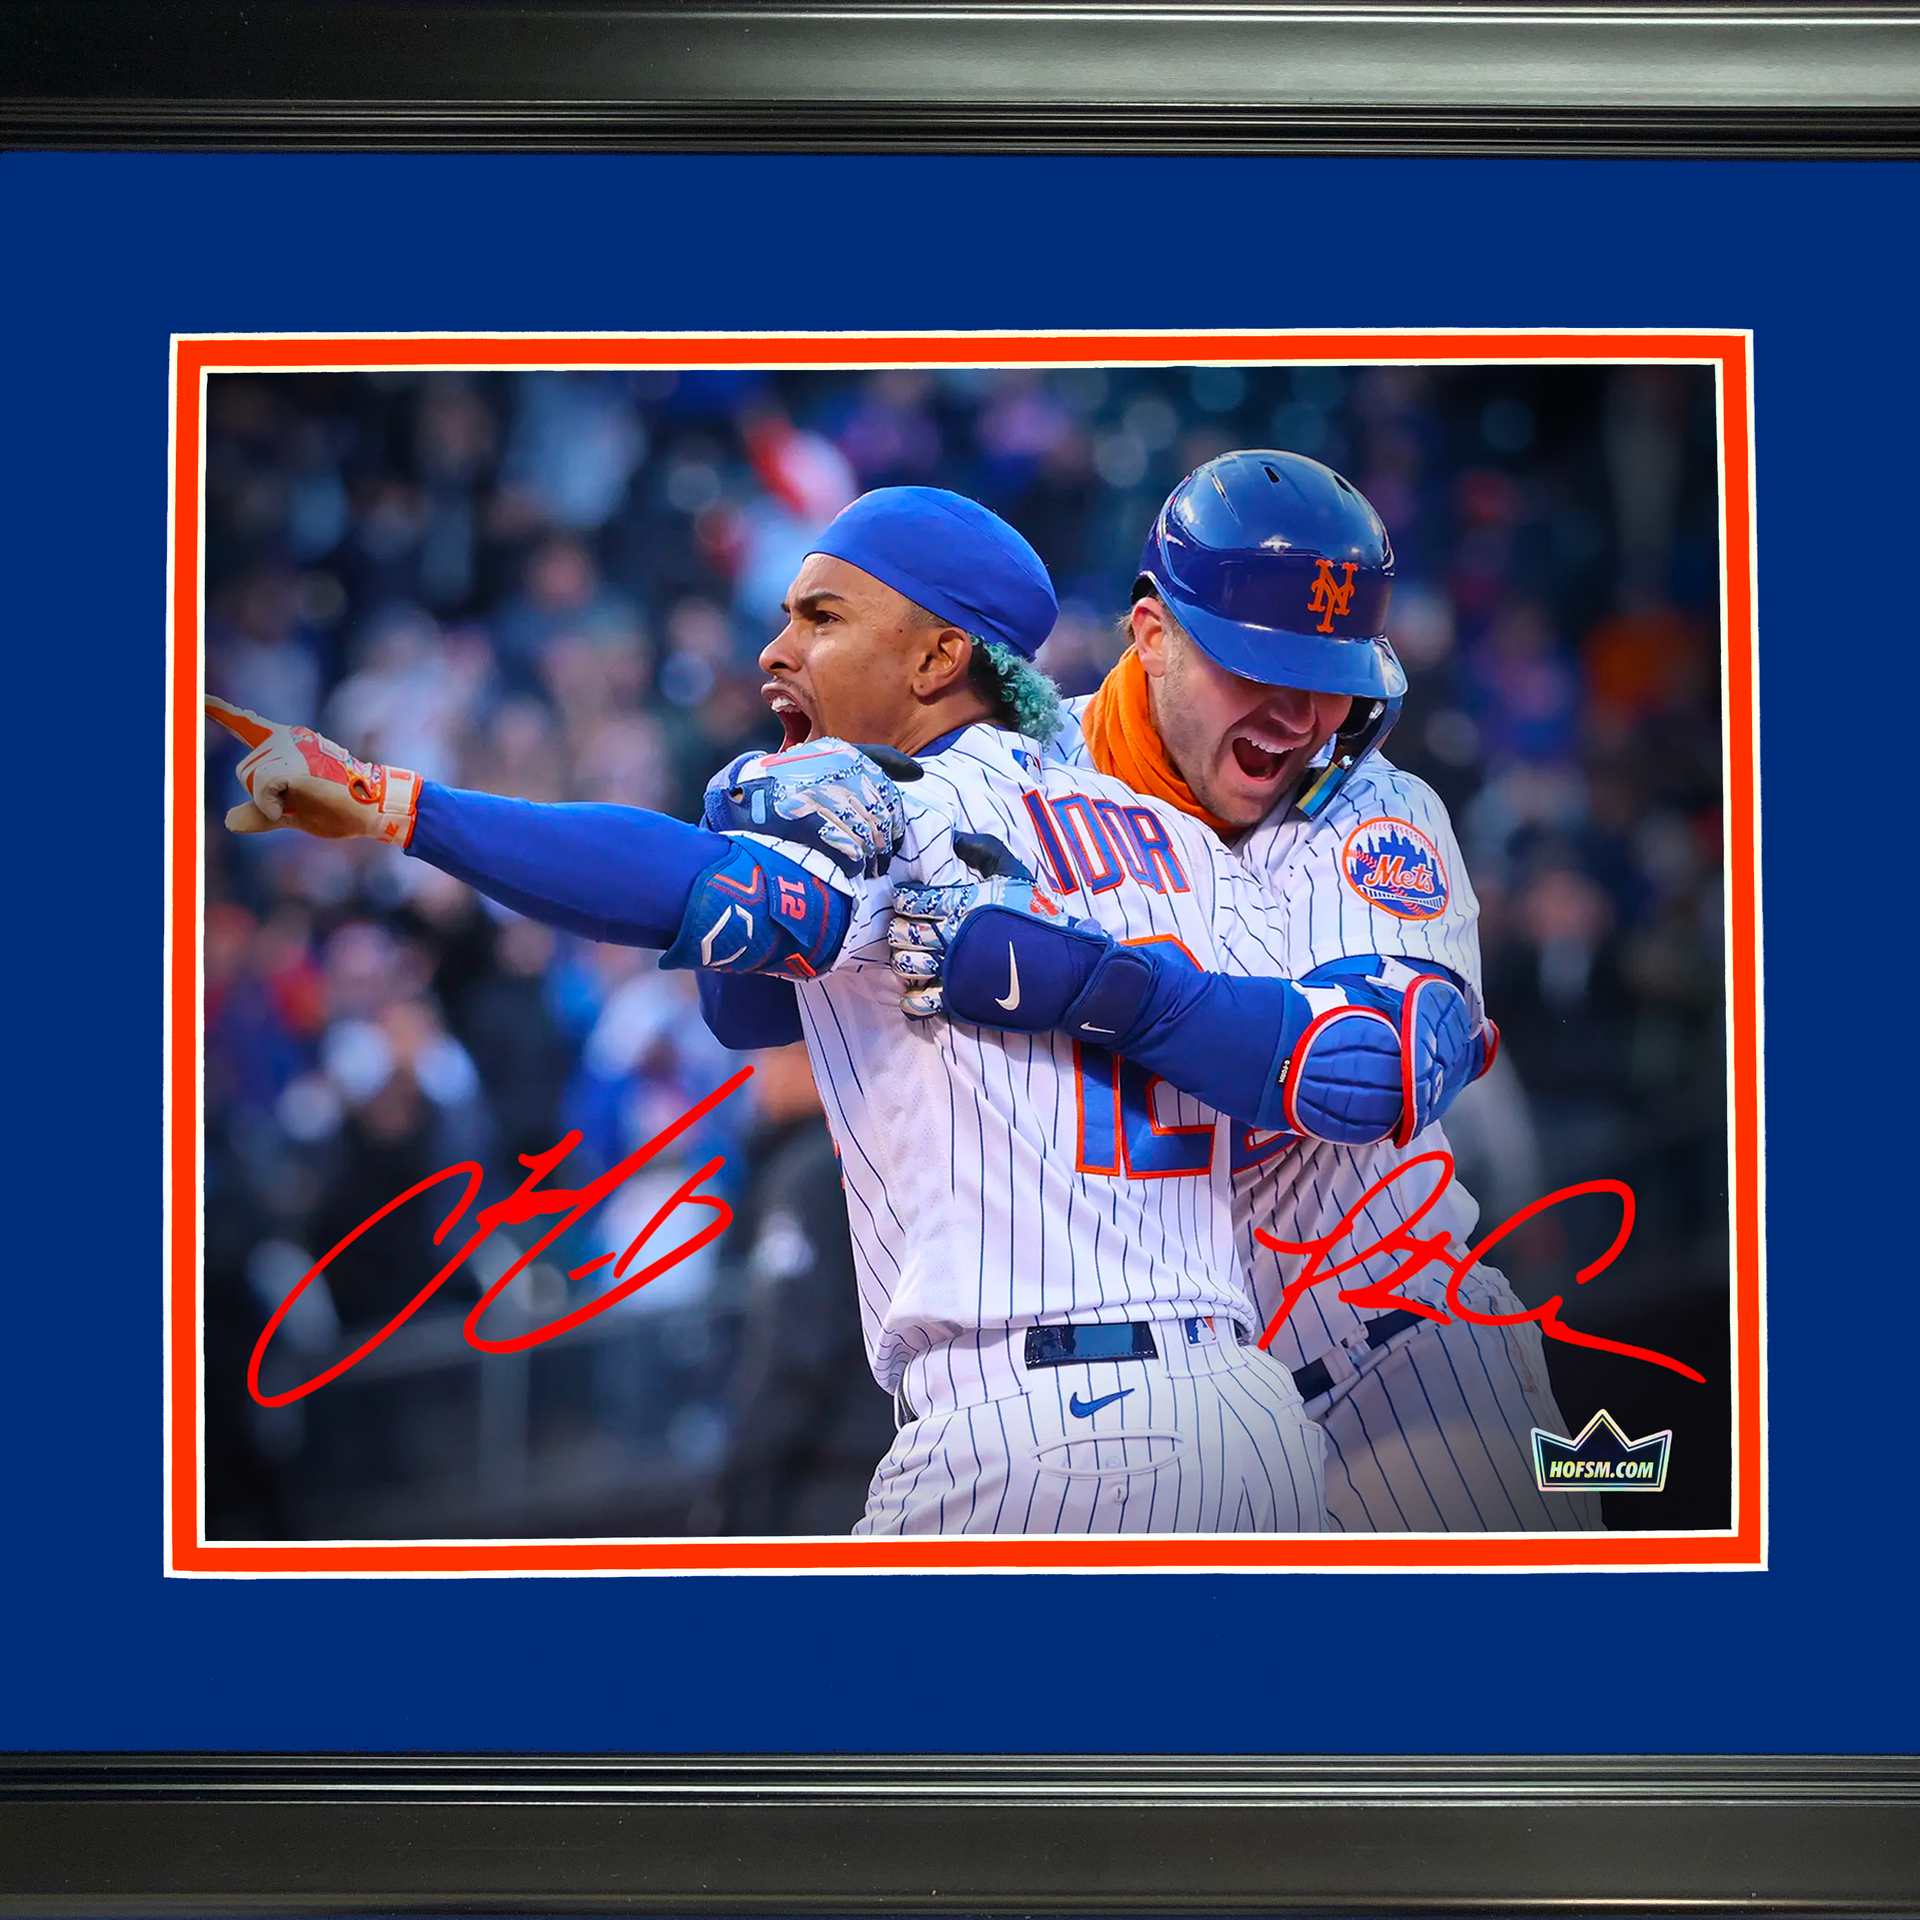 Lids Pete Alonso New York Mets Fanatics Authentic Unsigned Home Run Derby  Photograph